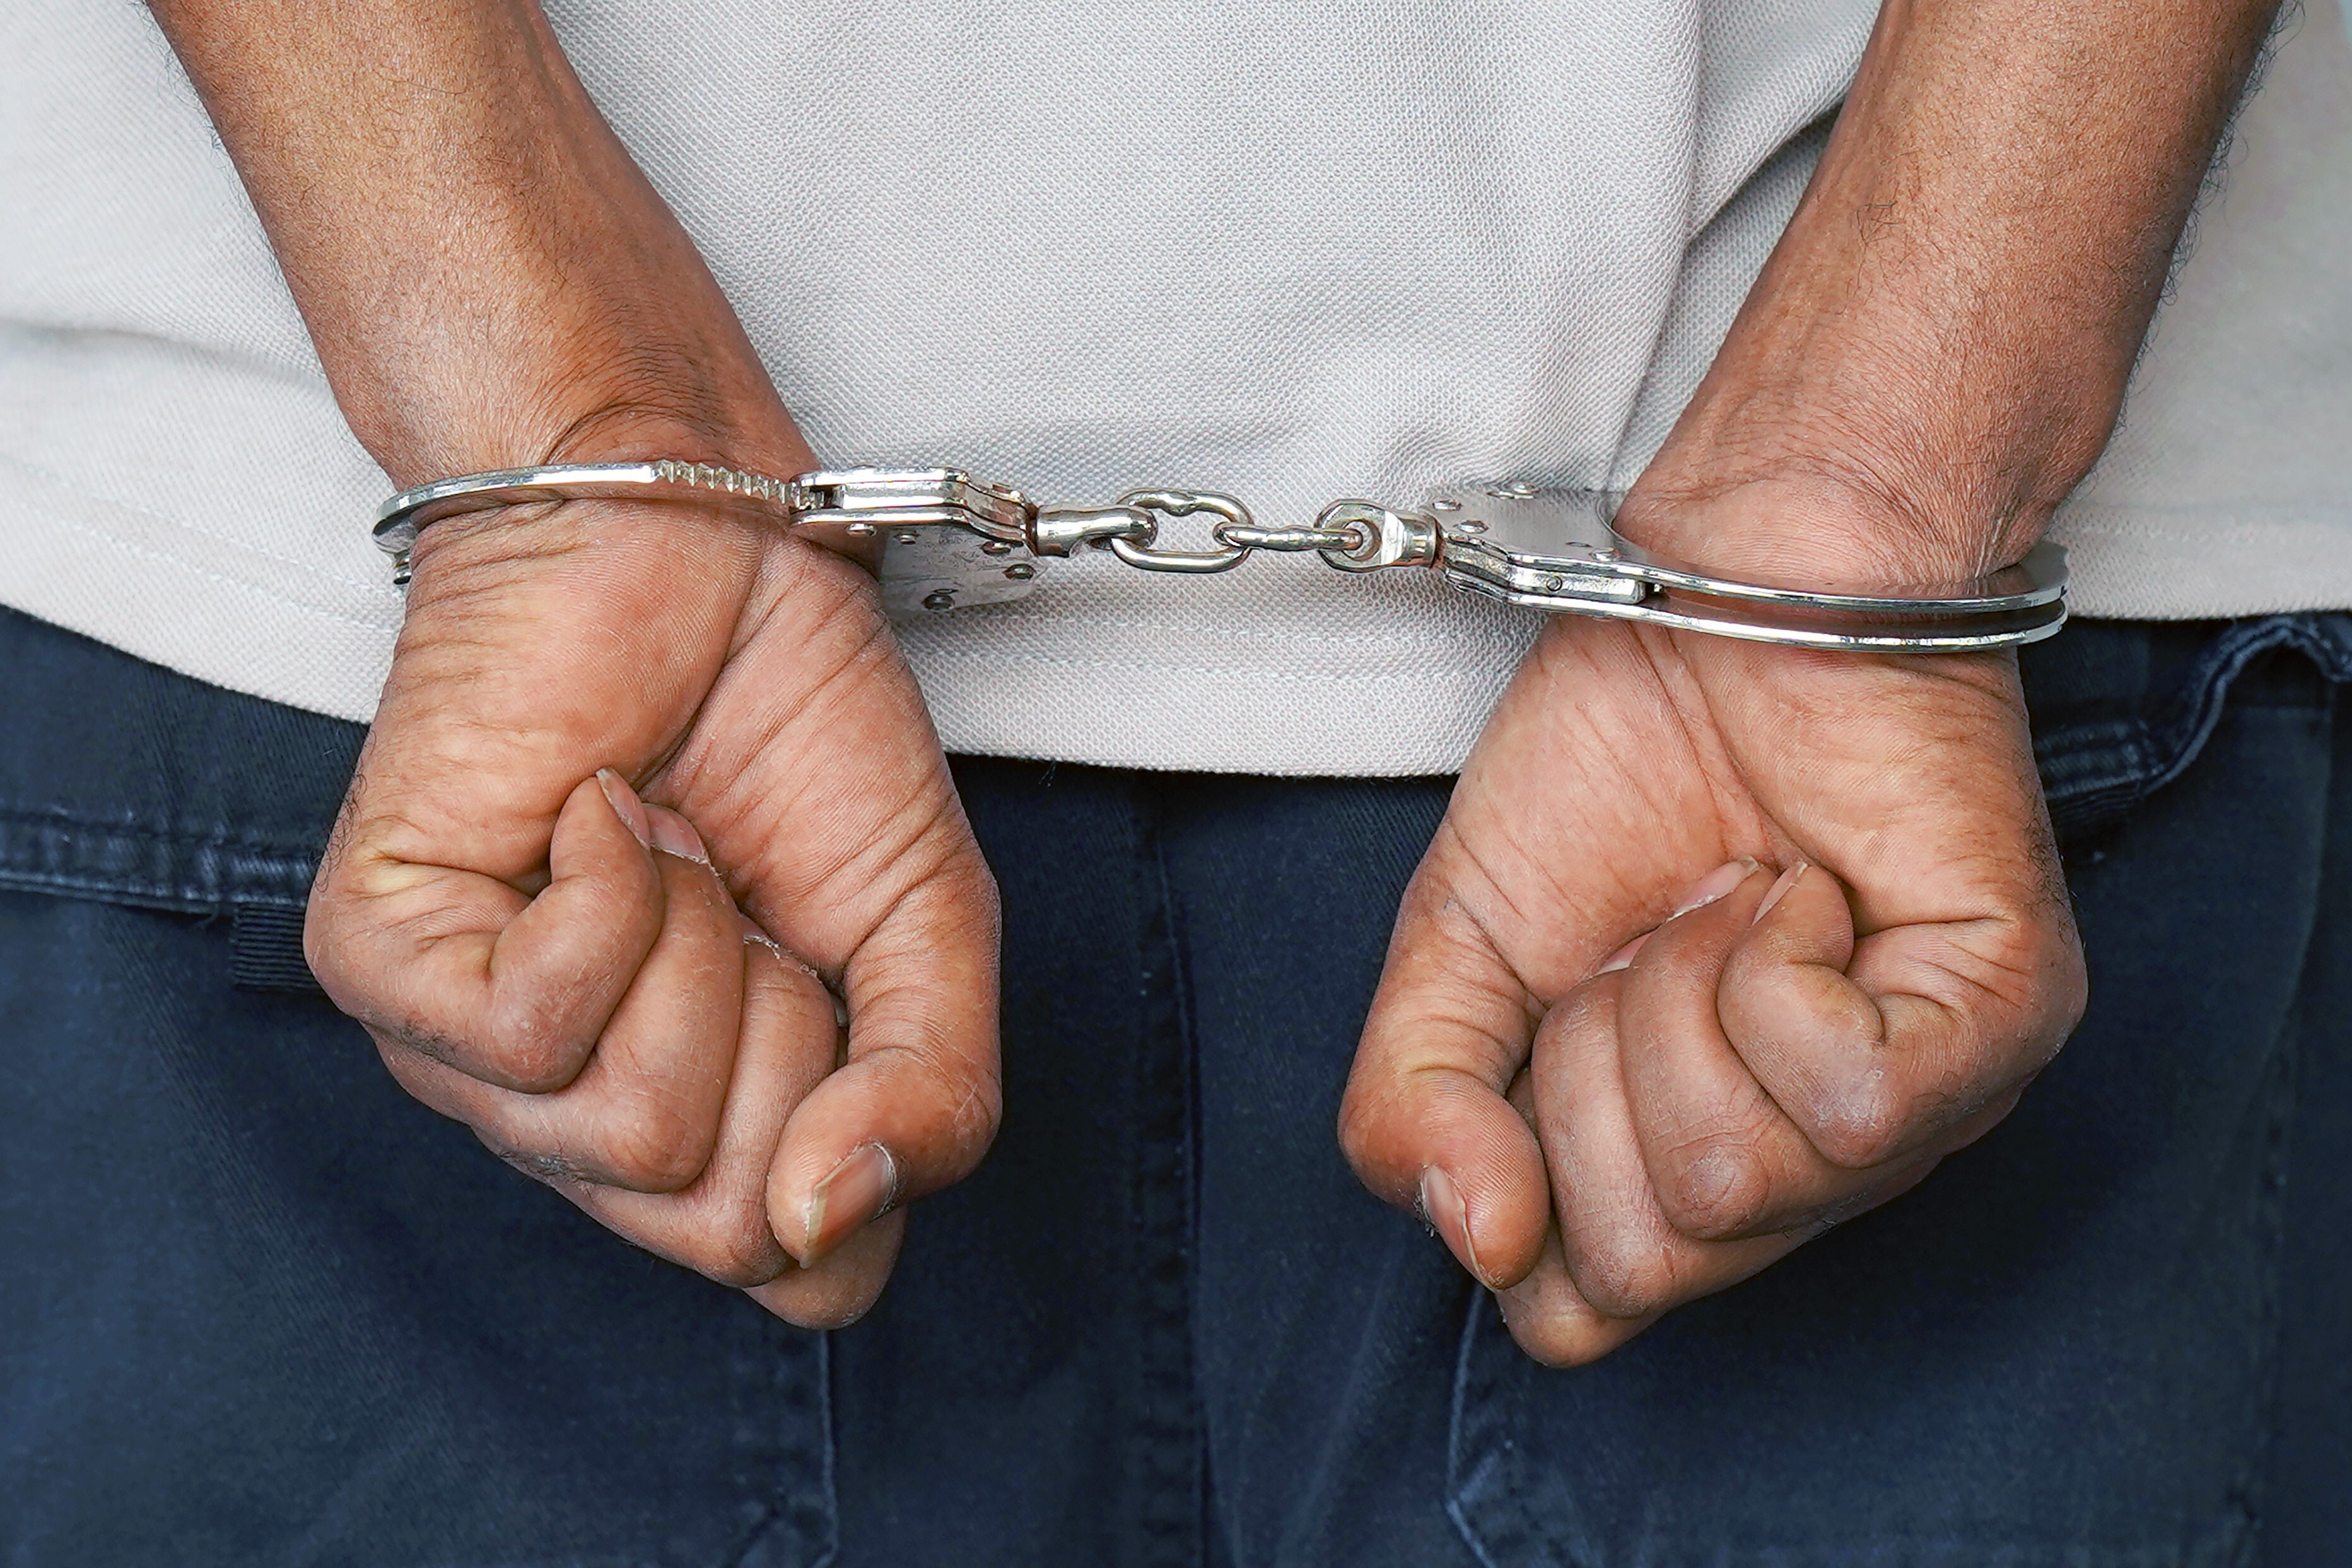 Police said the case was under investigation. Photo: Shutterstock